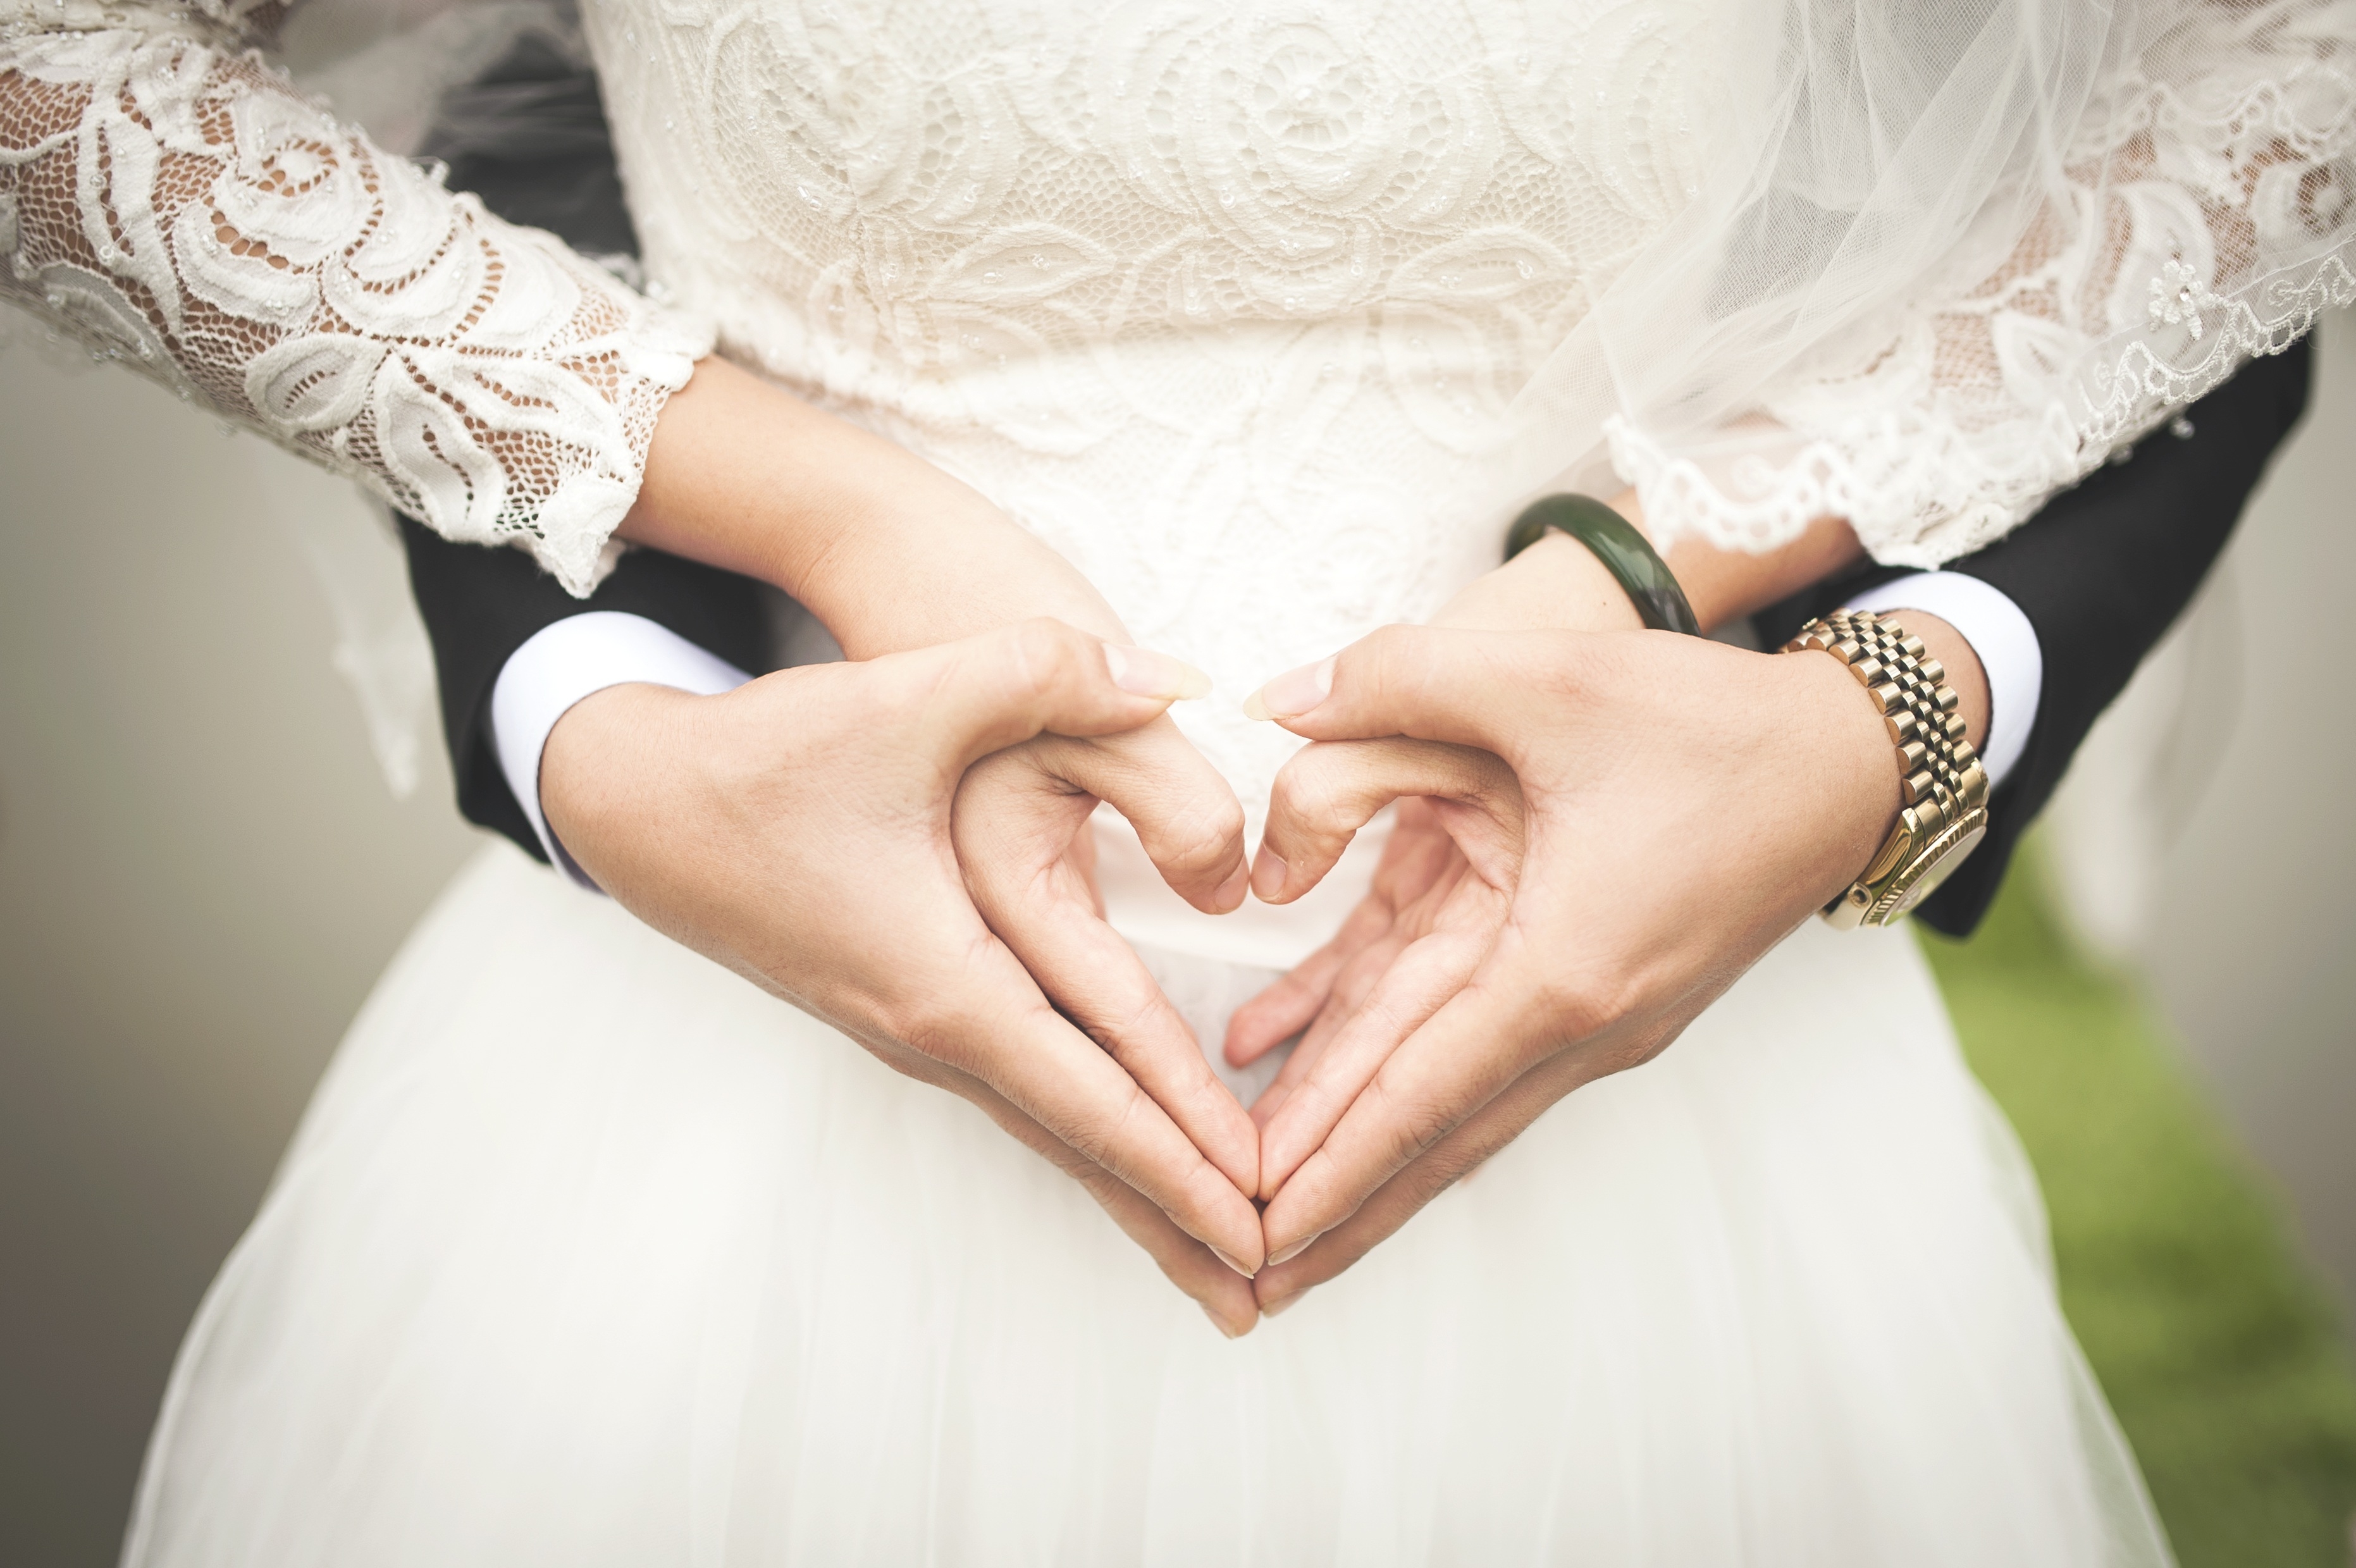 HD wallpaper, Wedding Outfit, Love Heart, Hands Together, Marriage, Bridegroom, Couple, Bride